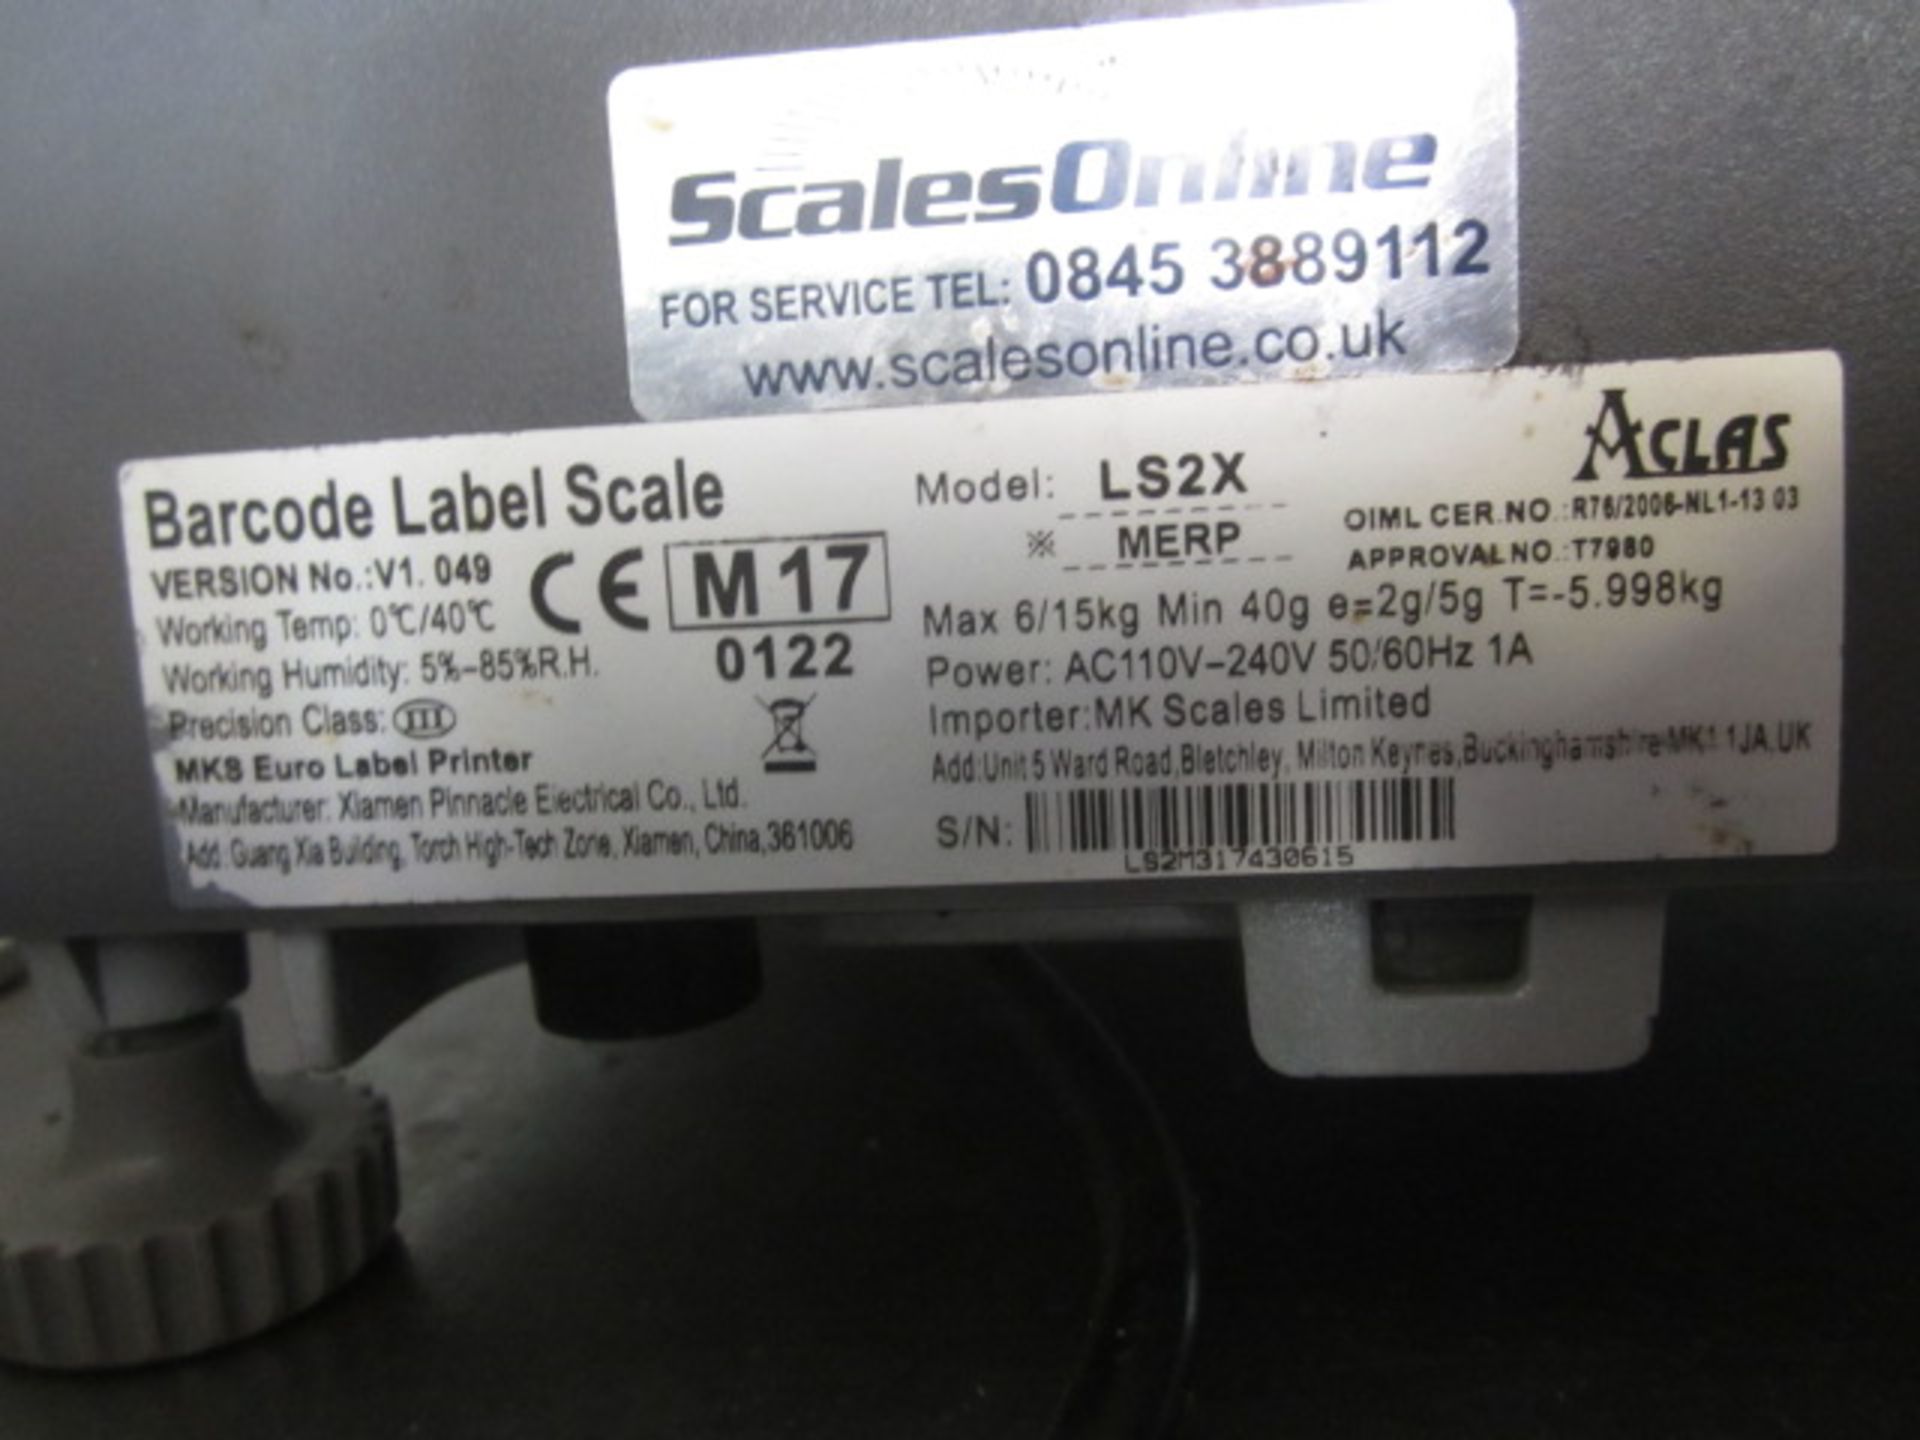 Aclas barcode label scales, model LS2X, max 6/15kg - min 40g - Image 4 of 4